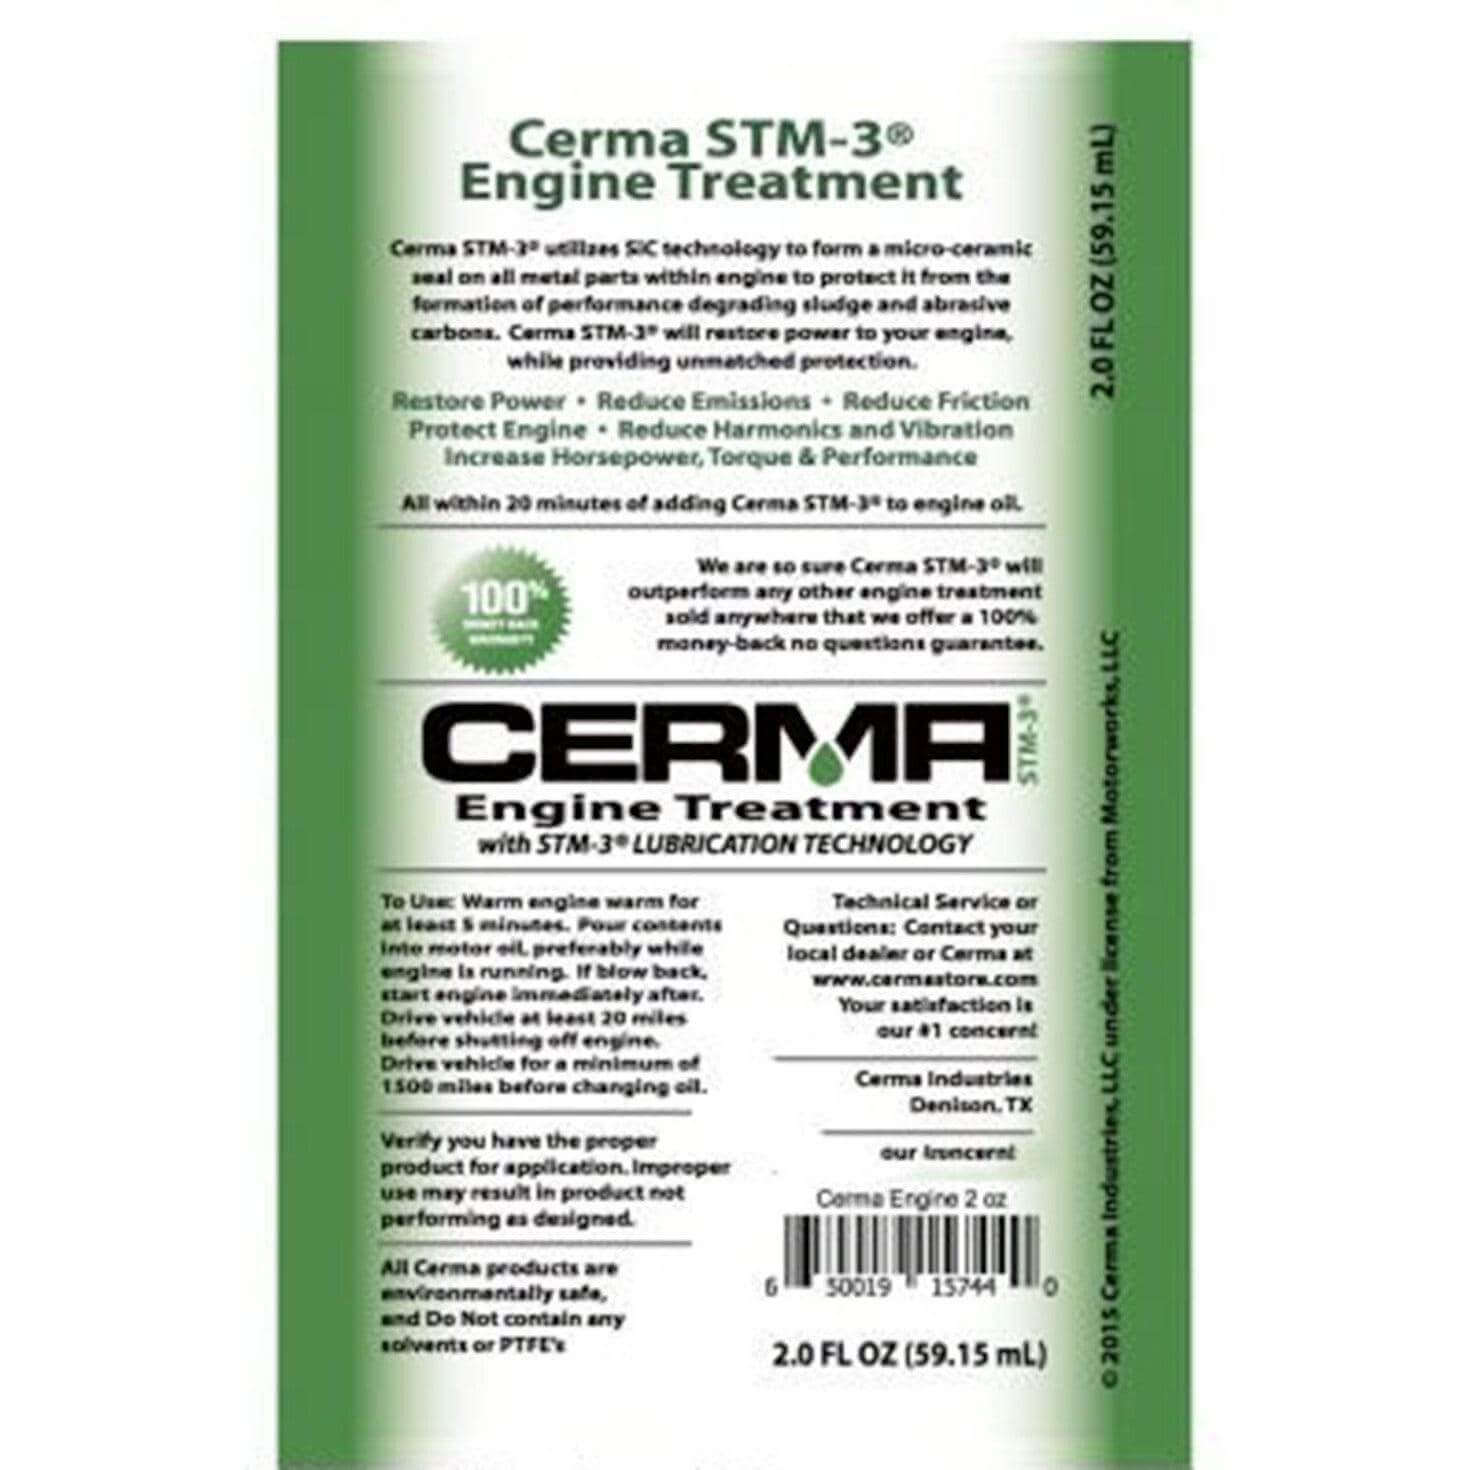 Cerma Ceramic Marine Engine Treatment at $105.6 only from cermatreatment.com